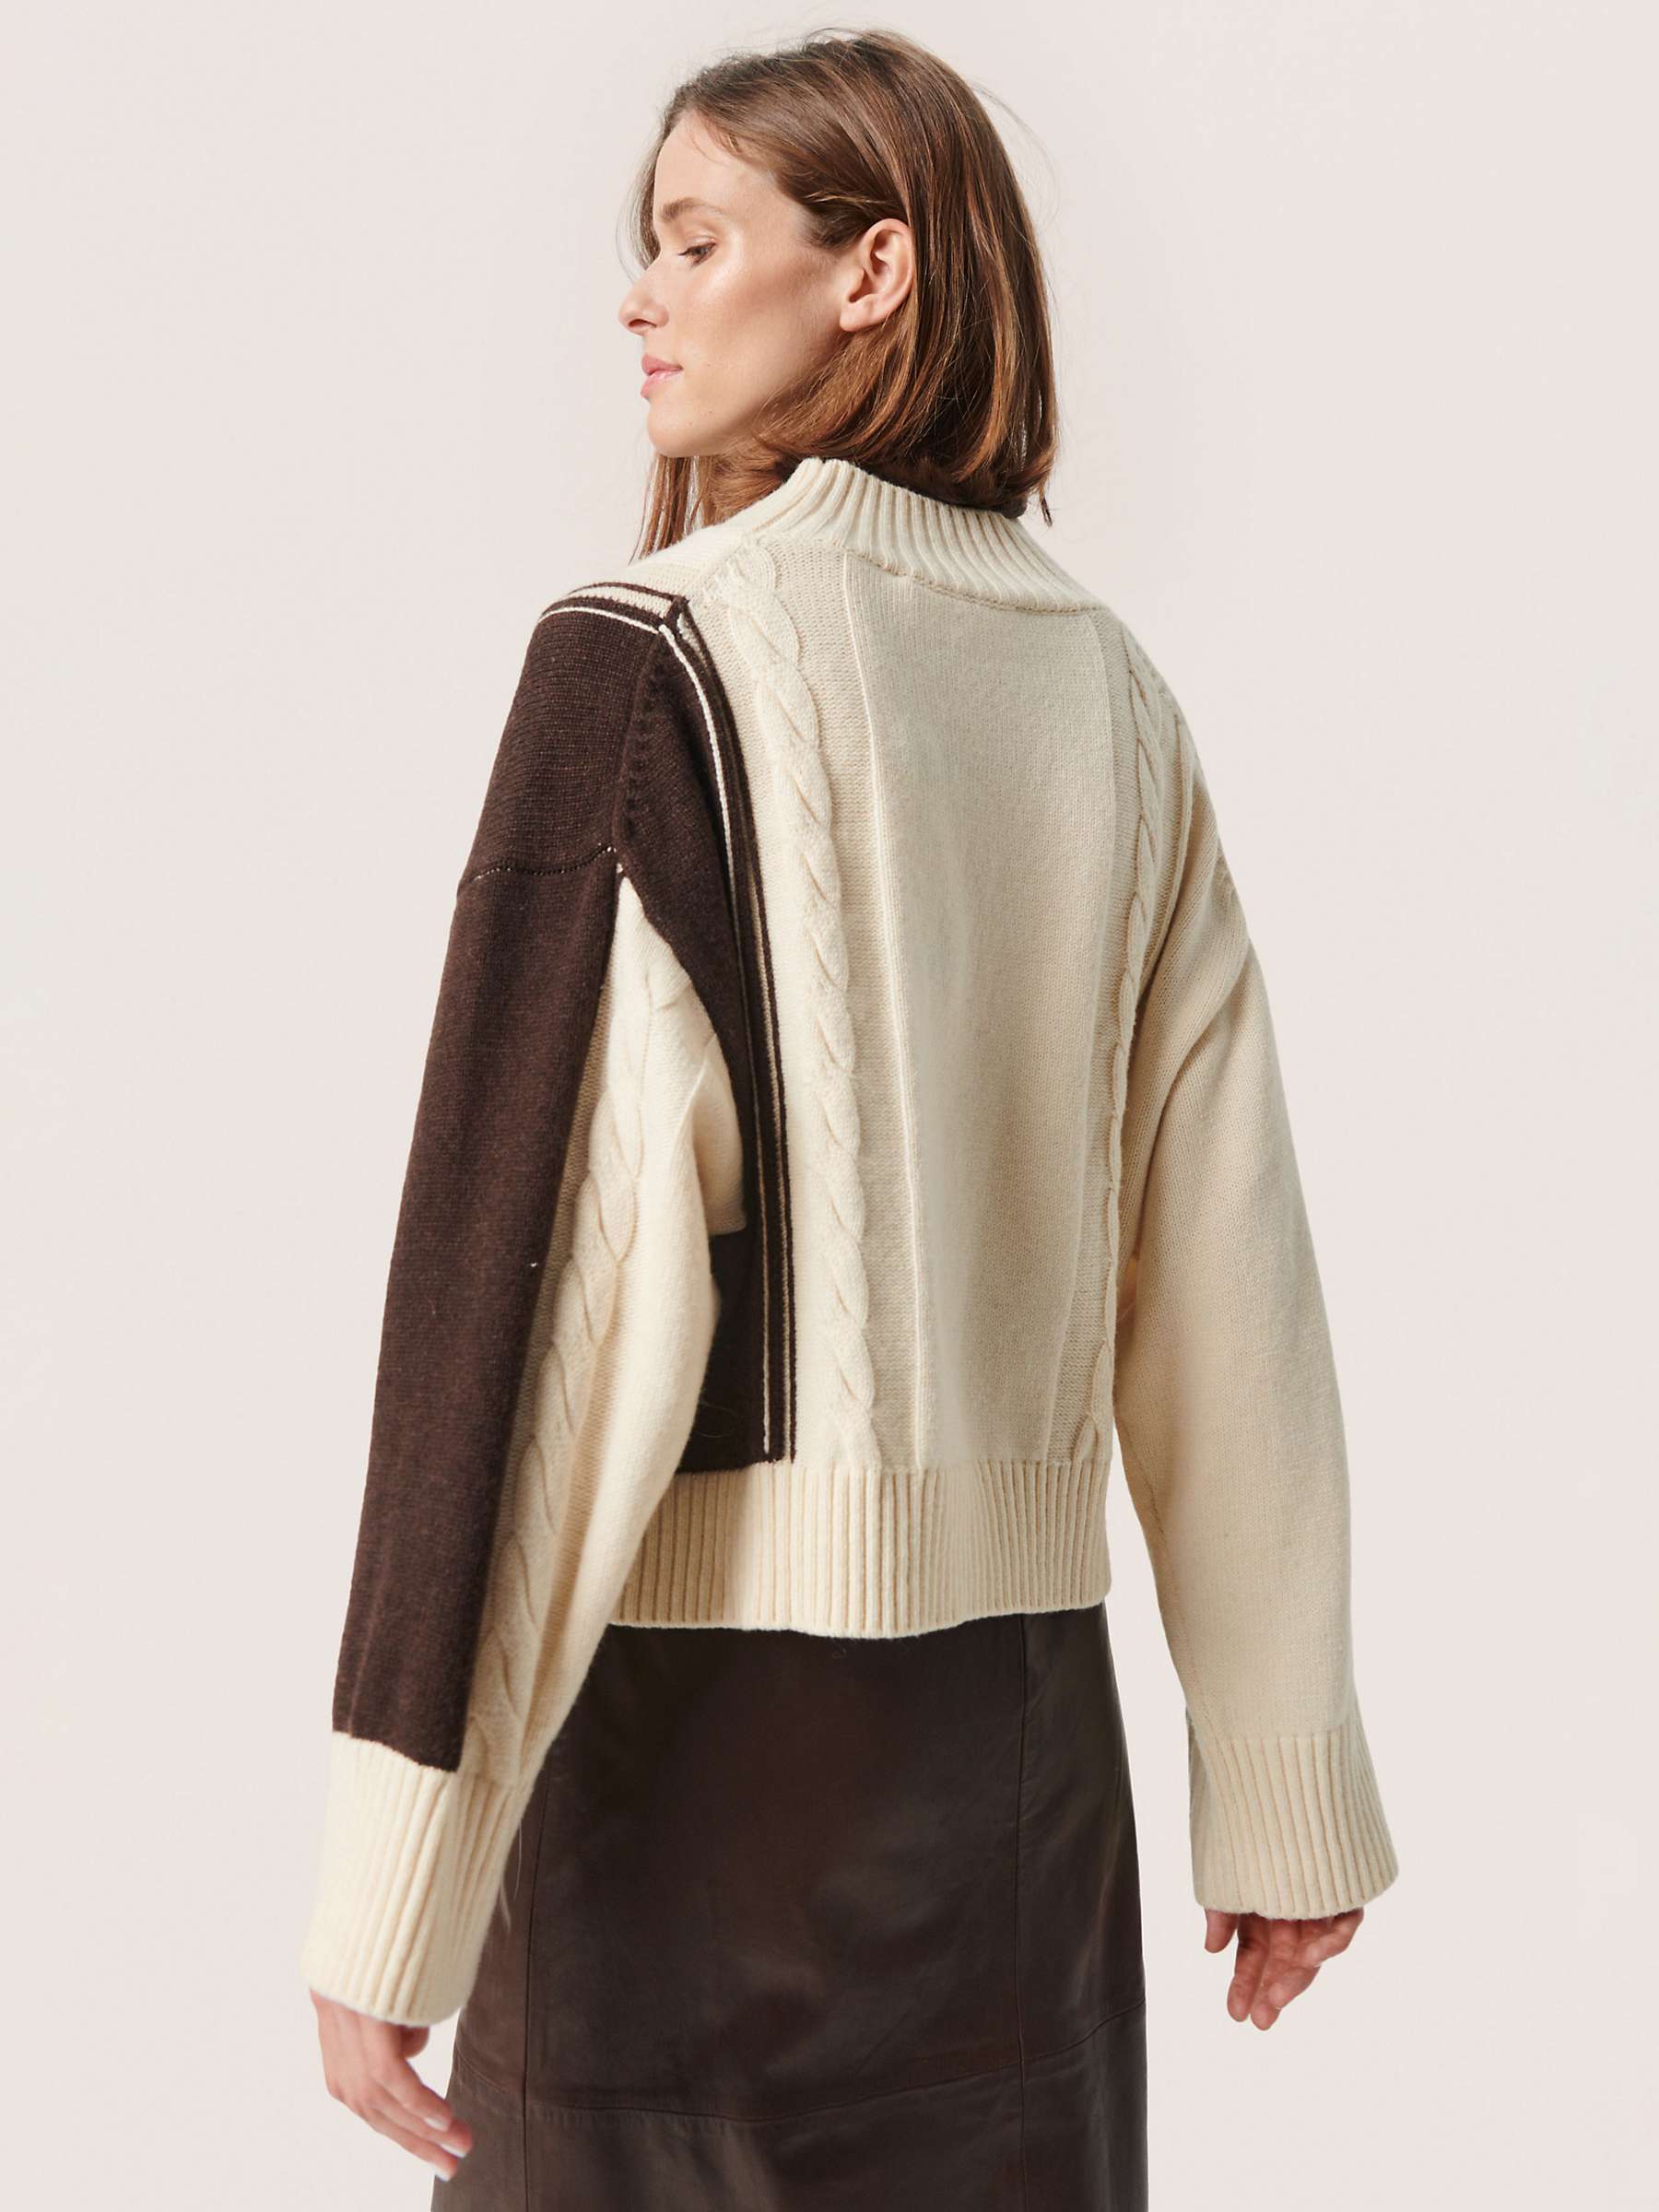 Buy Soaked In Luxury Llena Textured Jumper, White/Multi Online at johnlewis.com